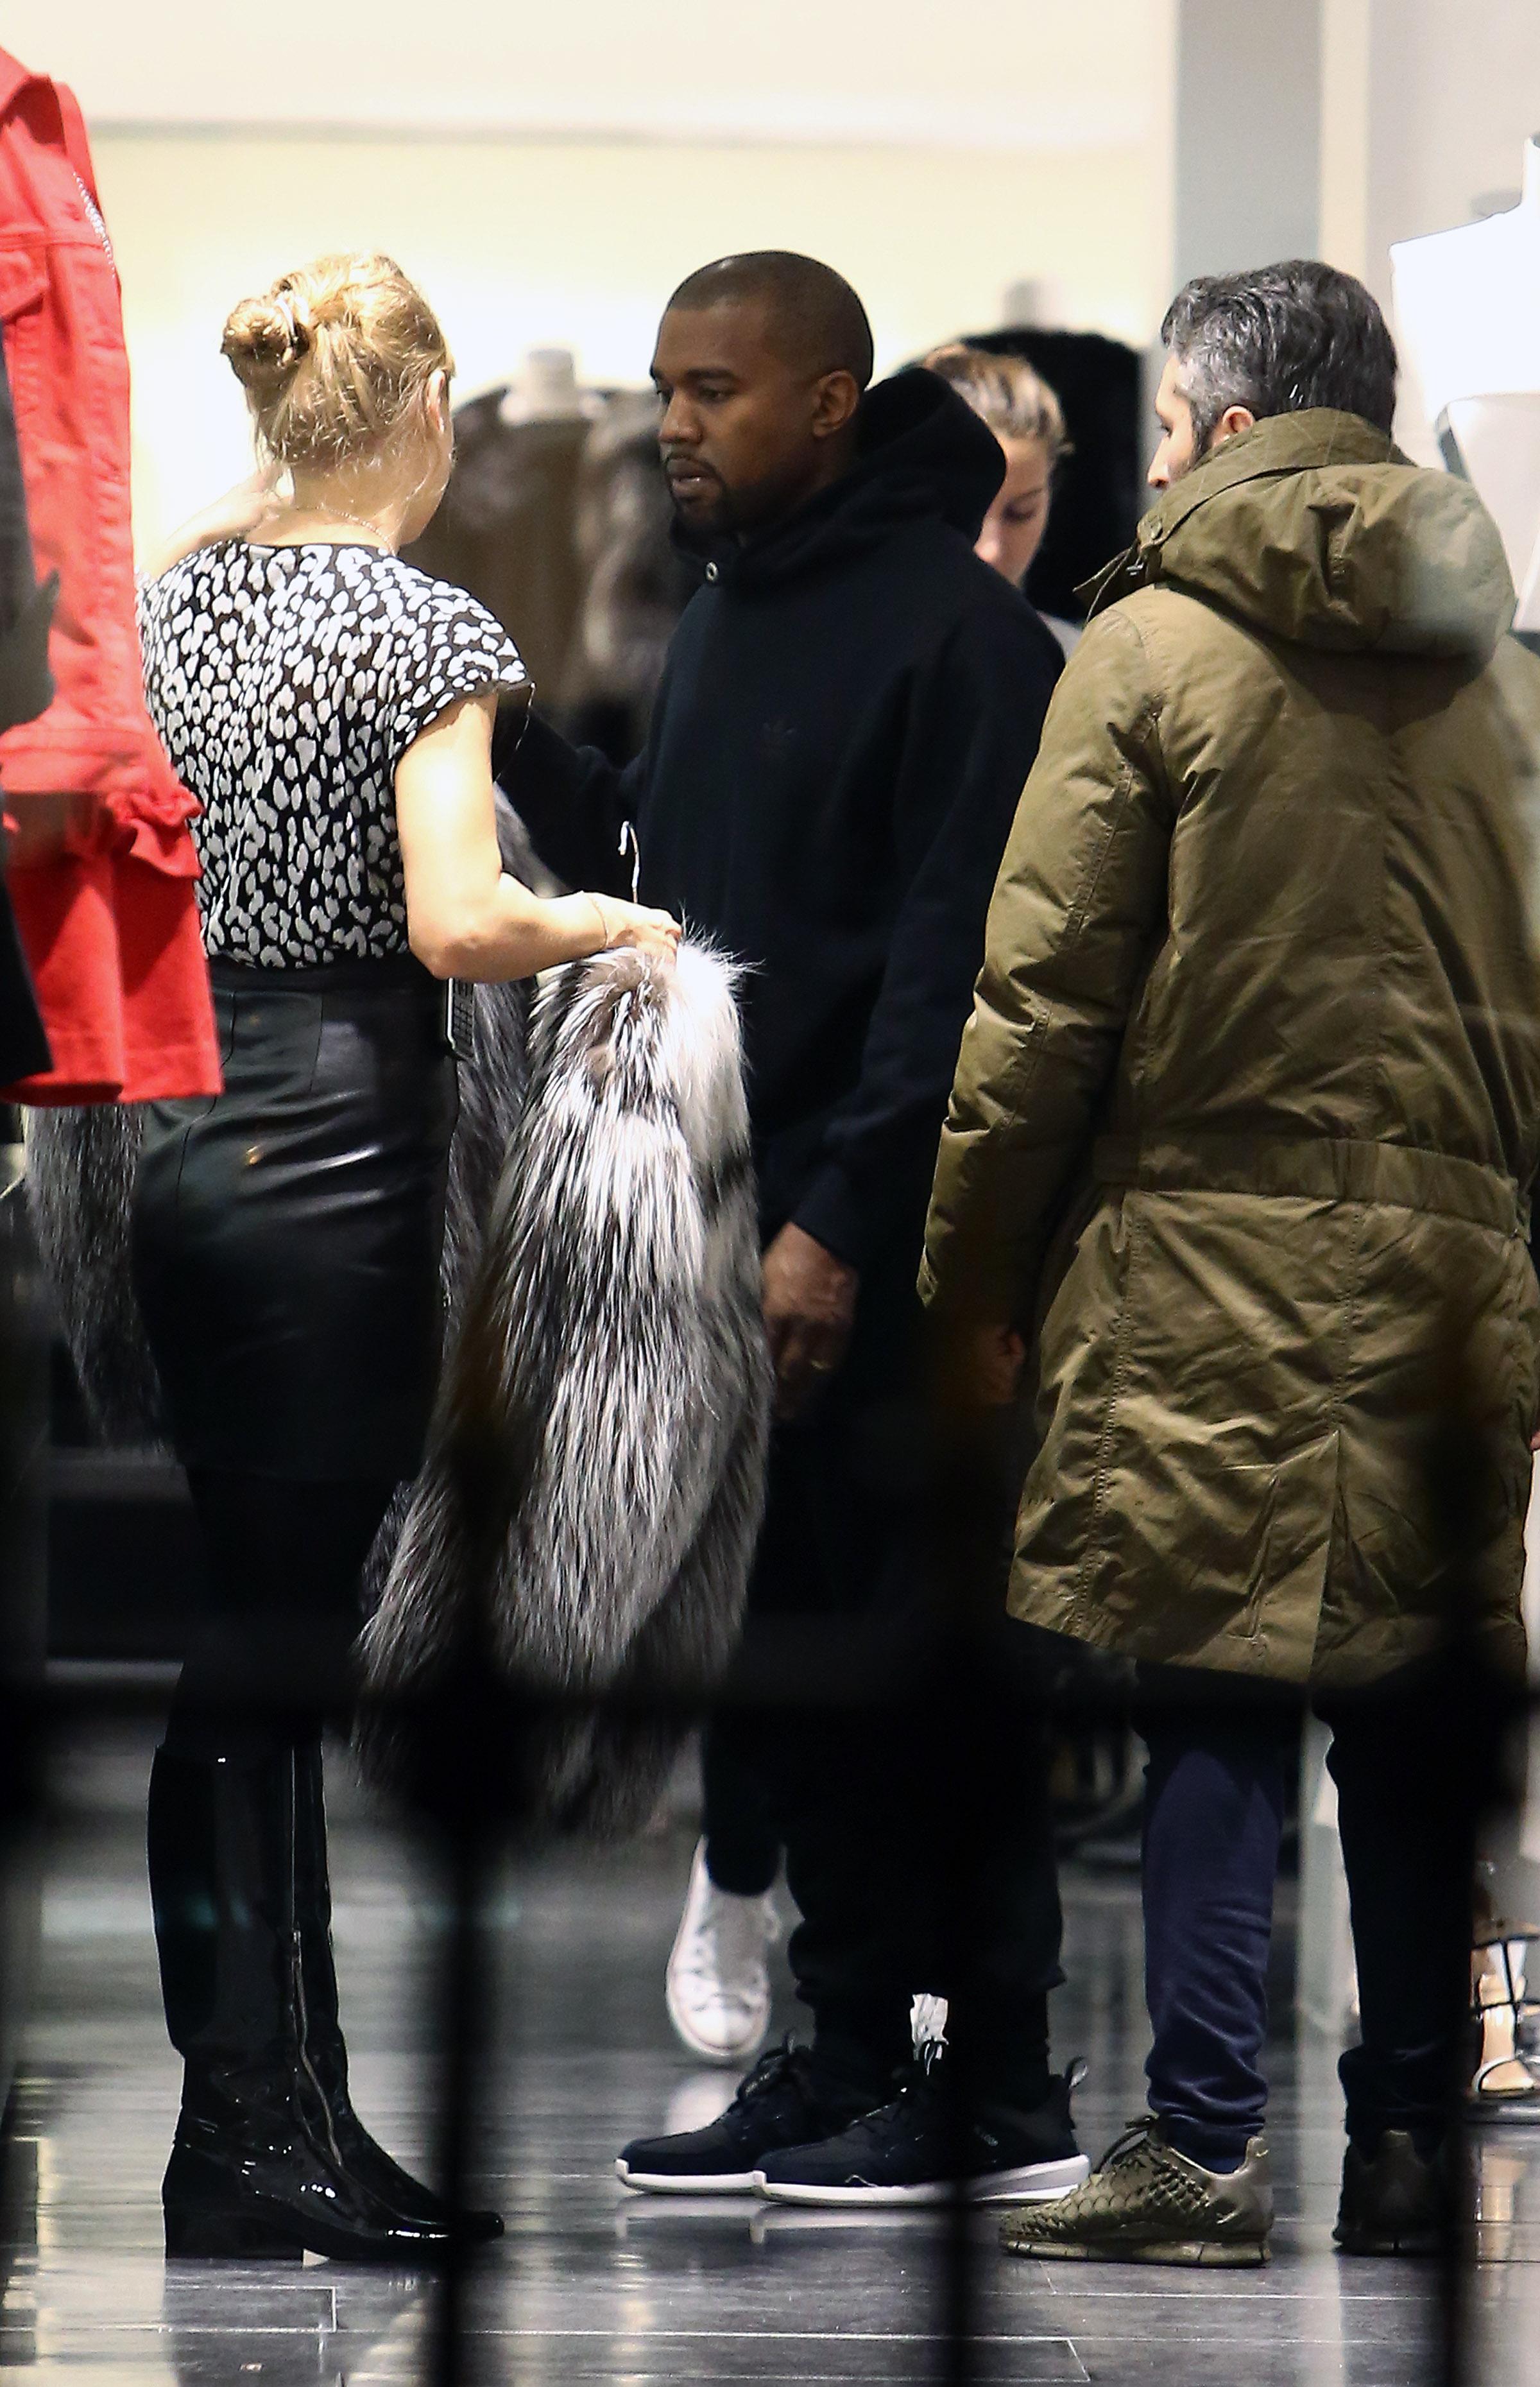 American producer and rapper Kanye West goes shopping at Montaigne market